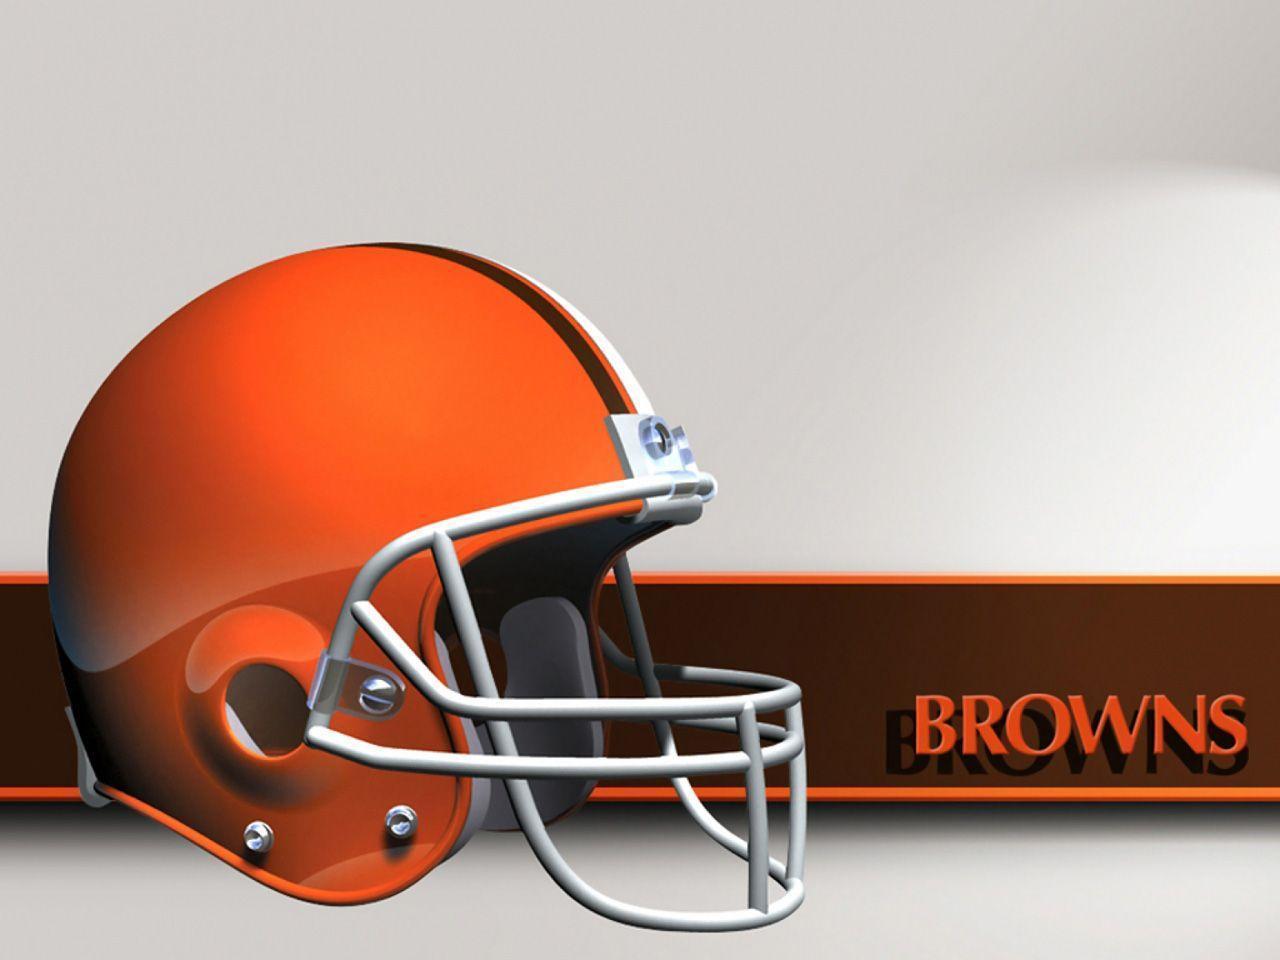 Cleveland Browns Wallpaper Picture 24437 Image. largepict